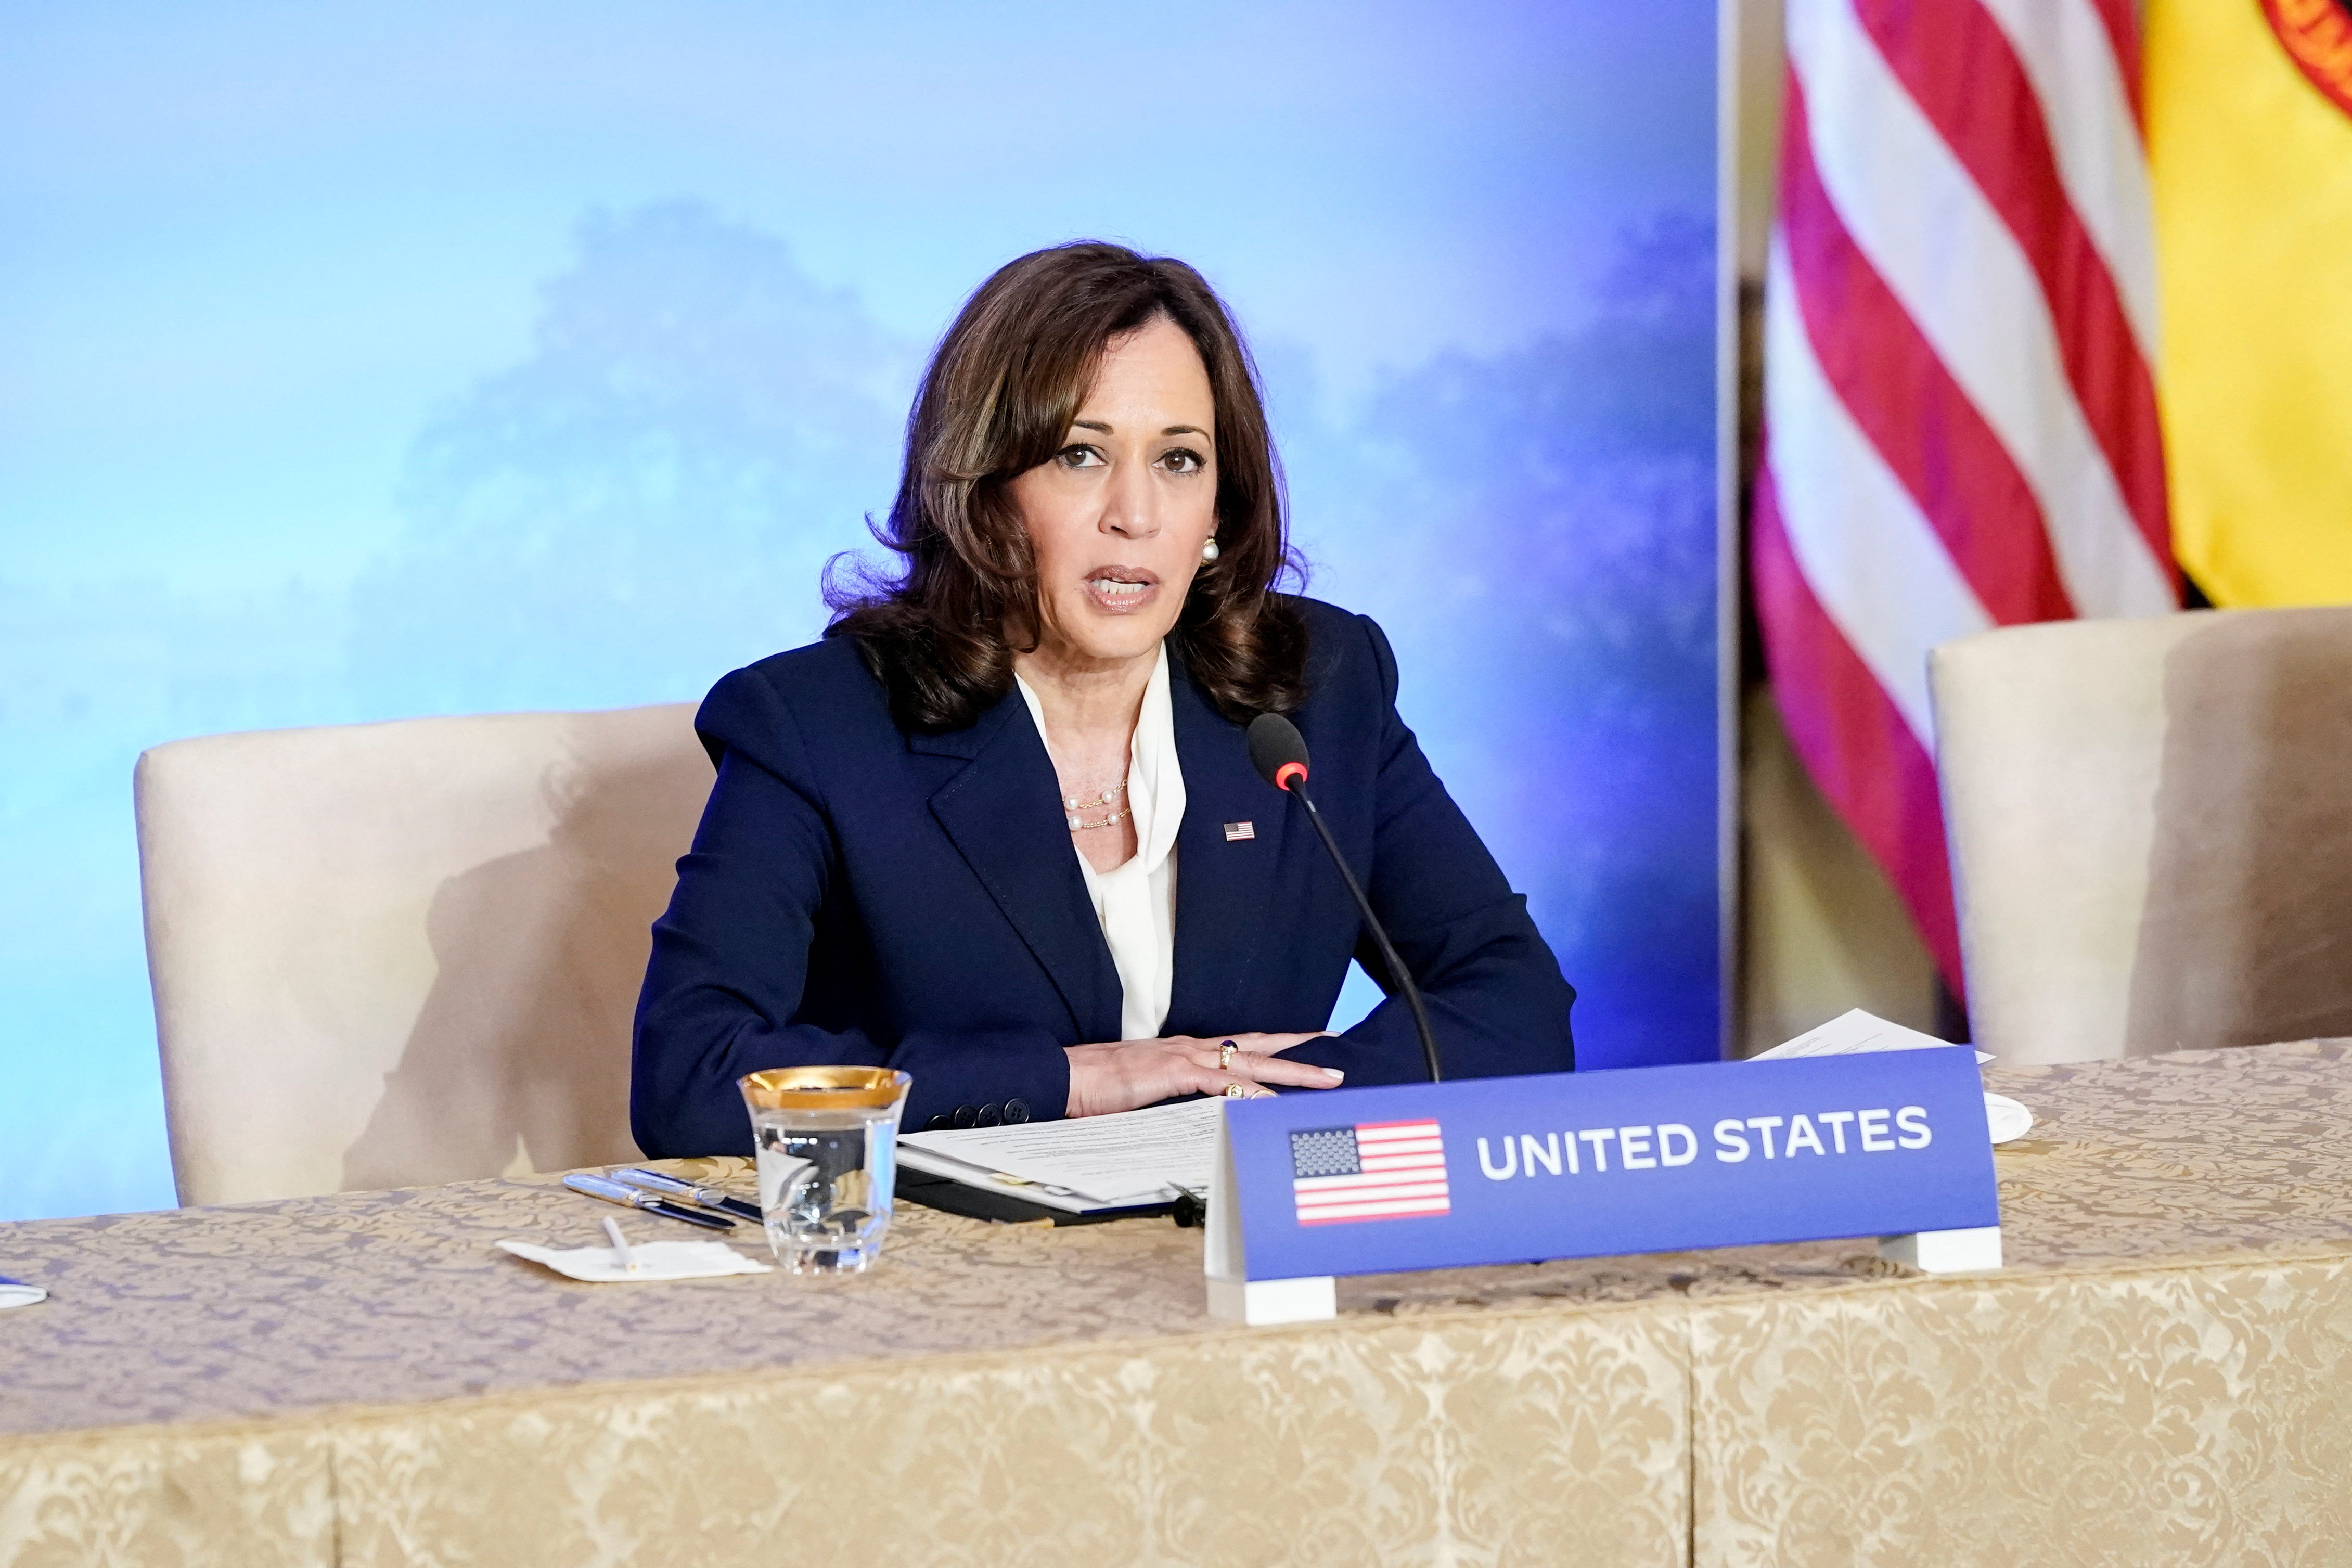 Vice President Kamala Harris Says U.S. is ‘Seeing an Epidemic of Hate’ After Mass Shooting in Buffalo